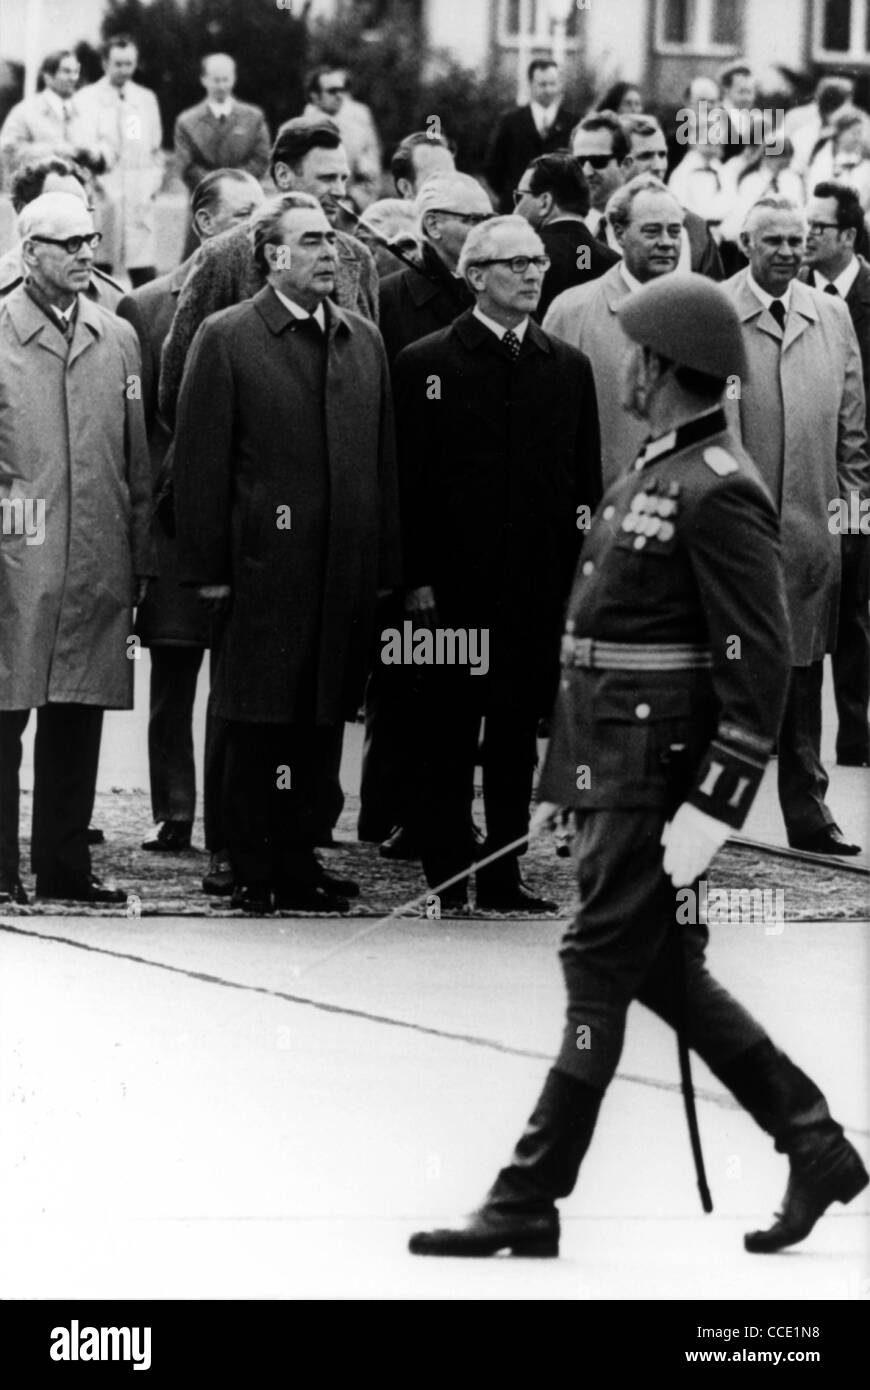 Military ceremonial at the beginning of the state visit of the Soviet party leader Leonid Brezhnev in East Berlin 1973. Stock Photo